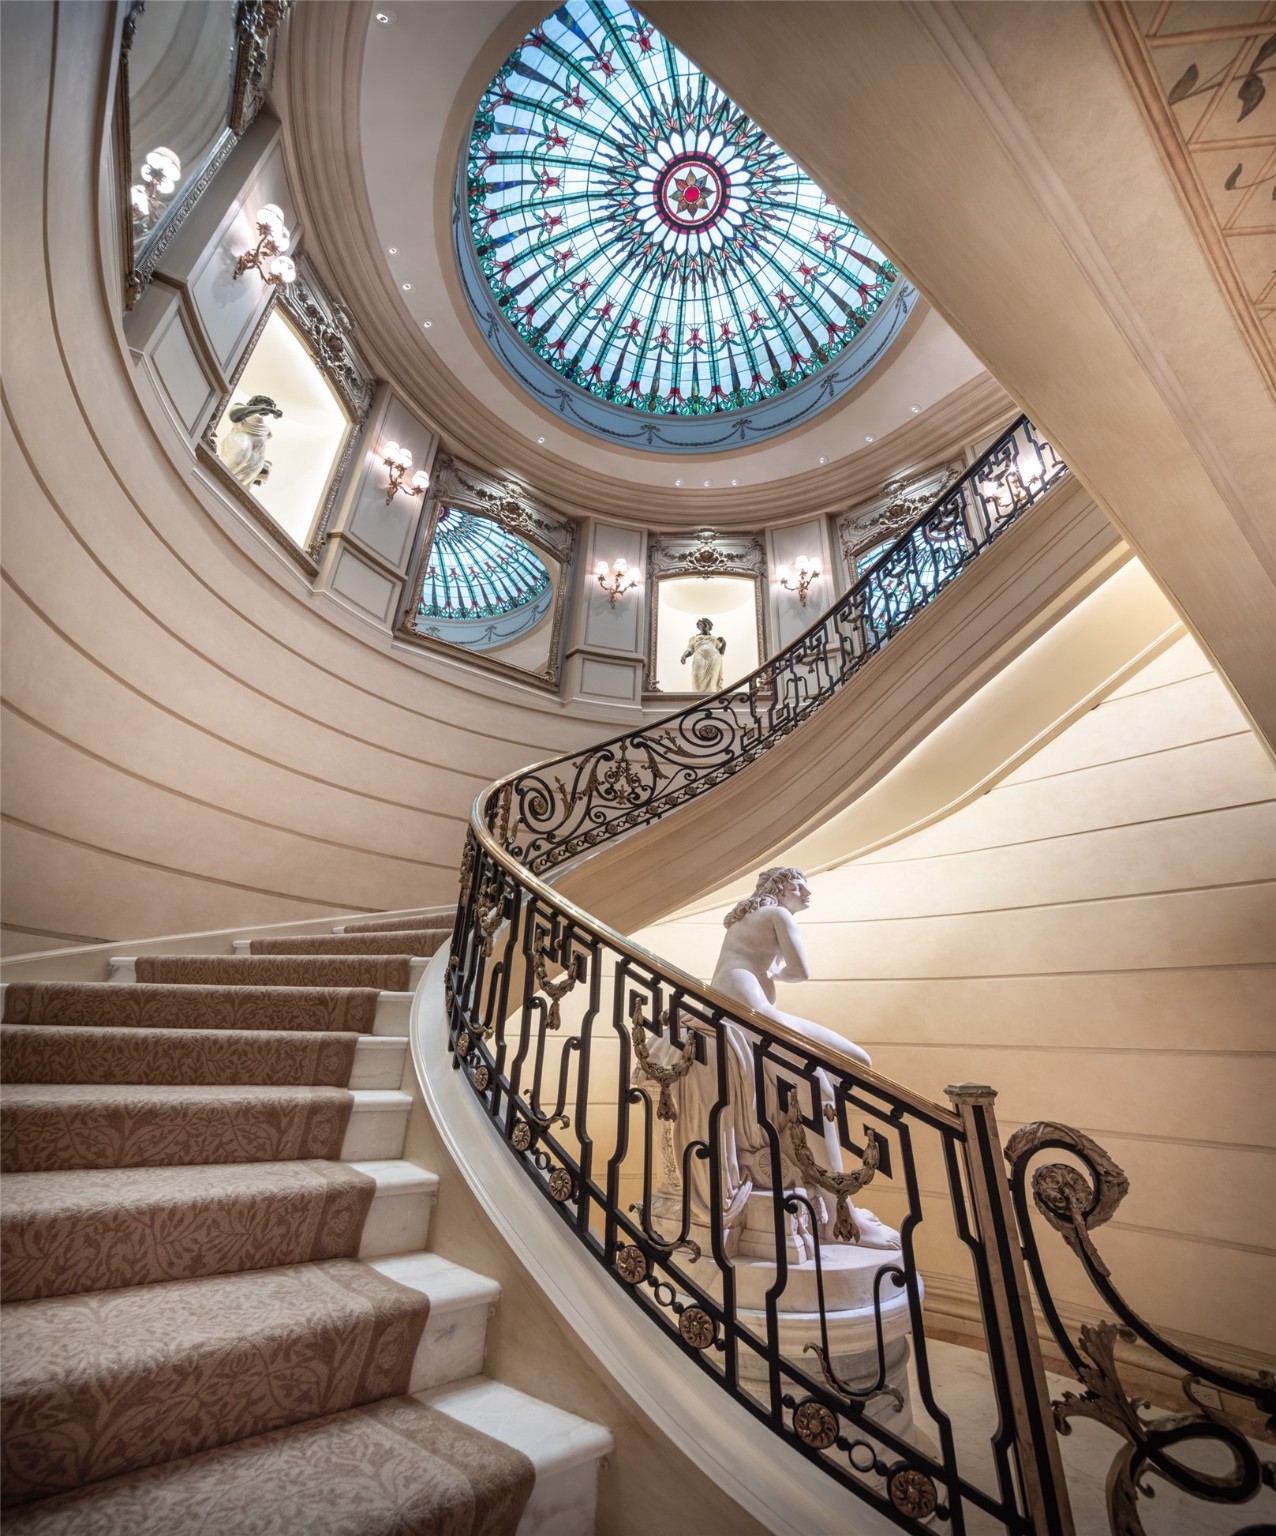 Architectural beauty! A stained glass domed ceiling inspired by Tiffany rises above the grand Stair Hall.